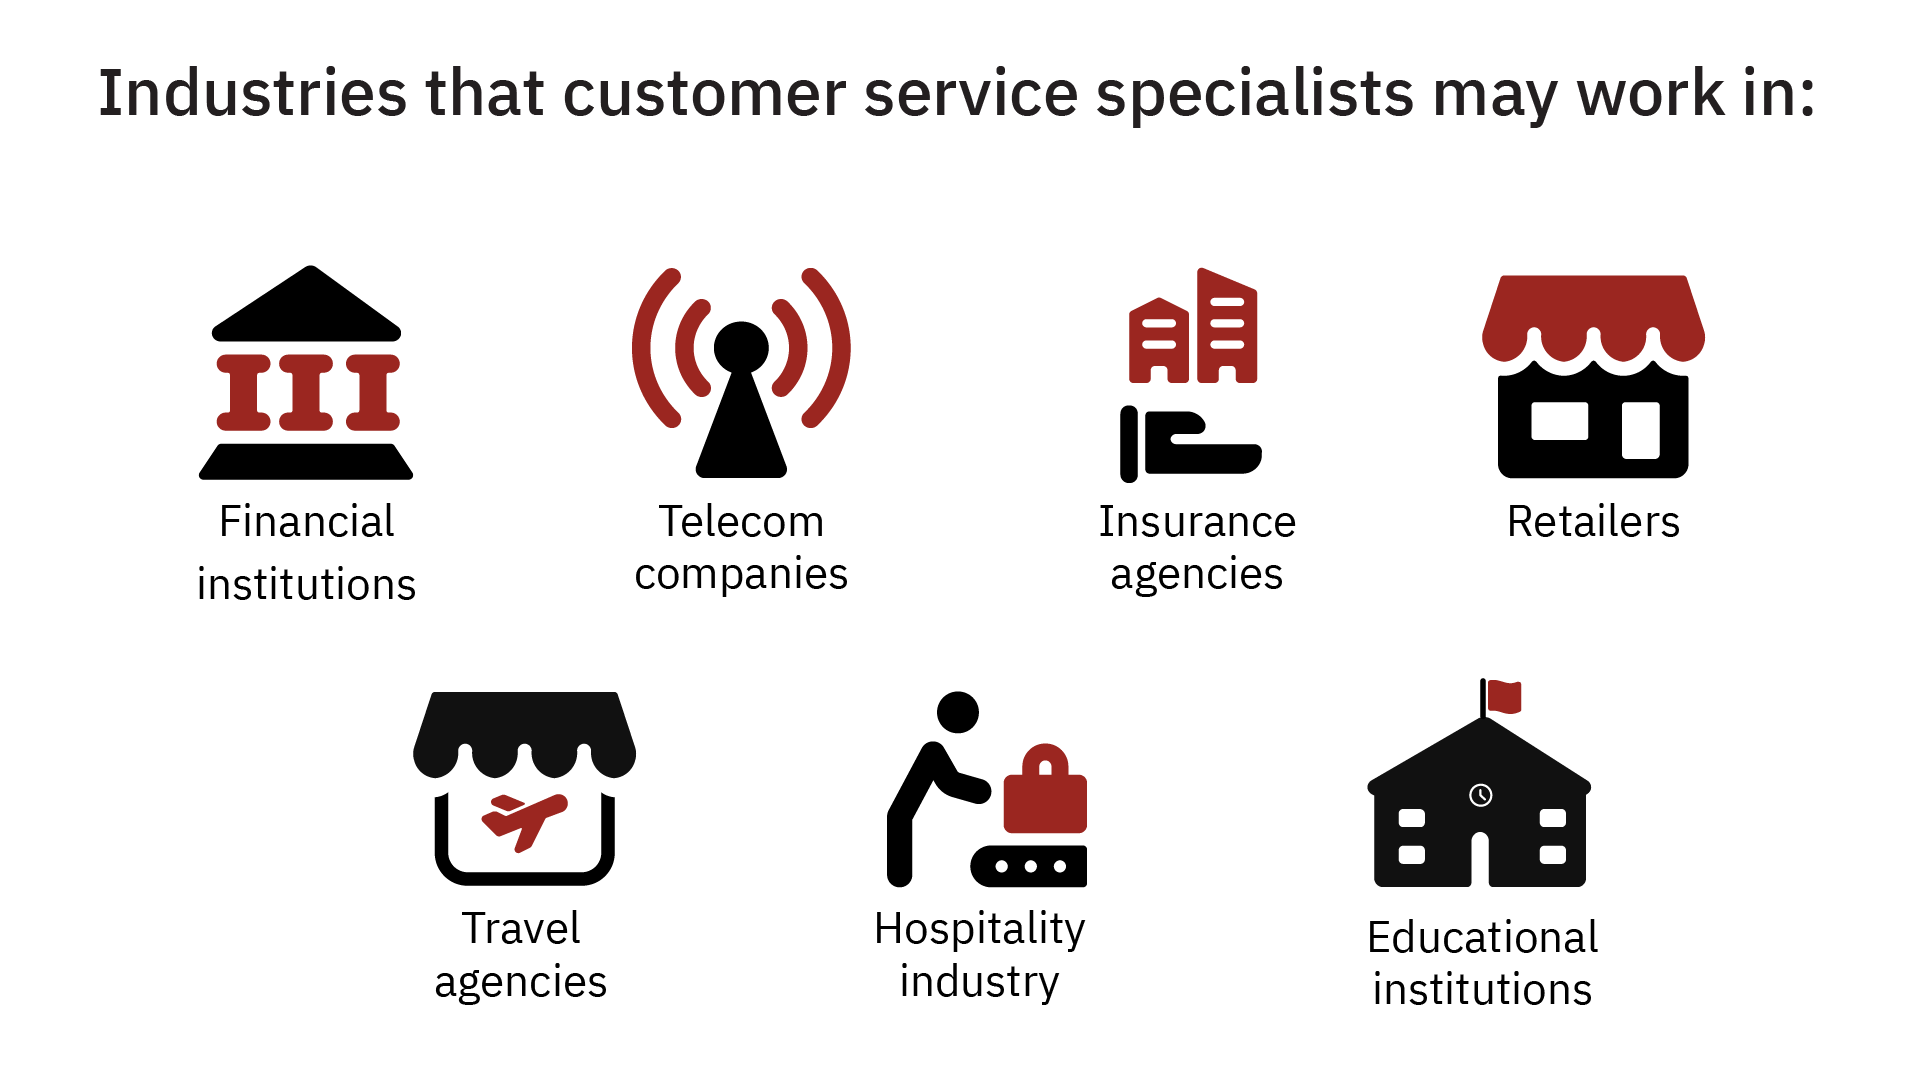 Industries customer service specialists may work in